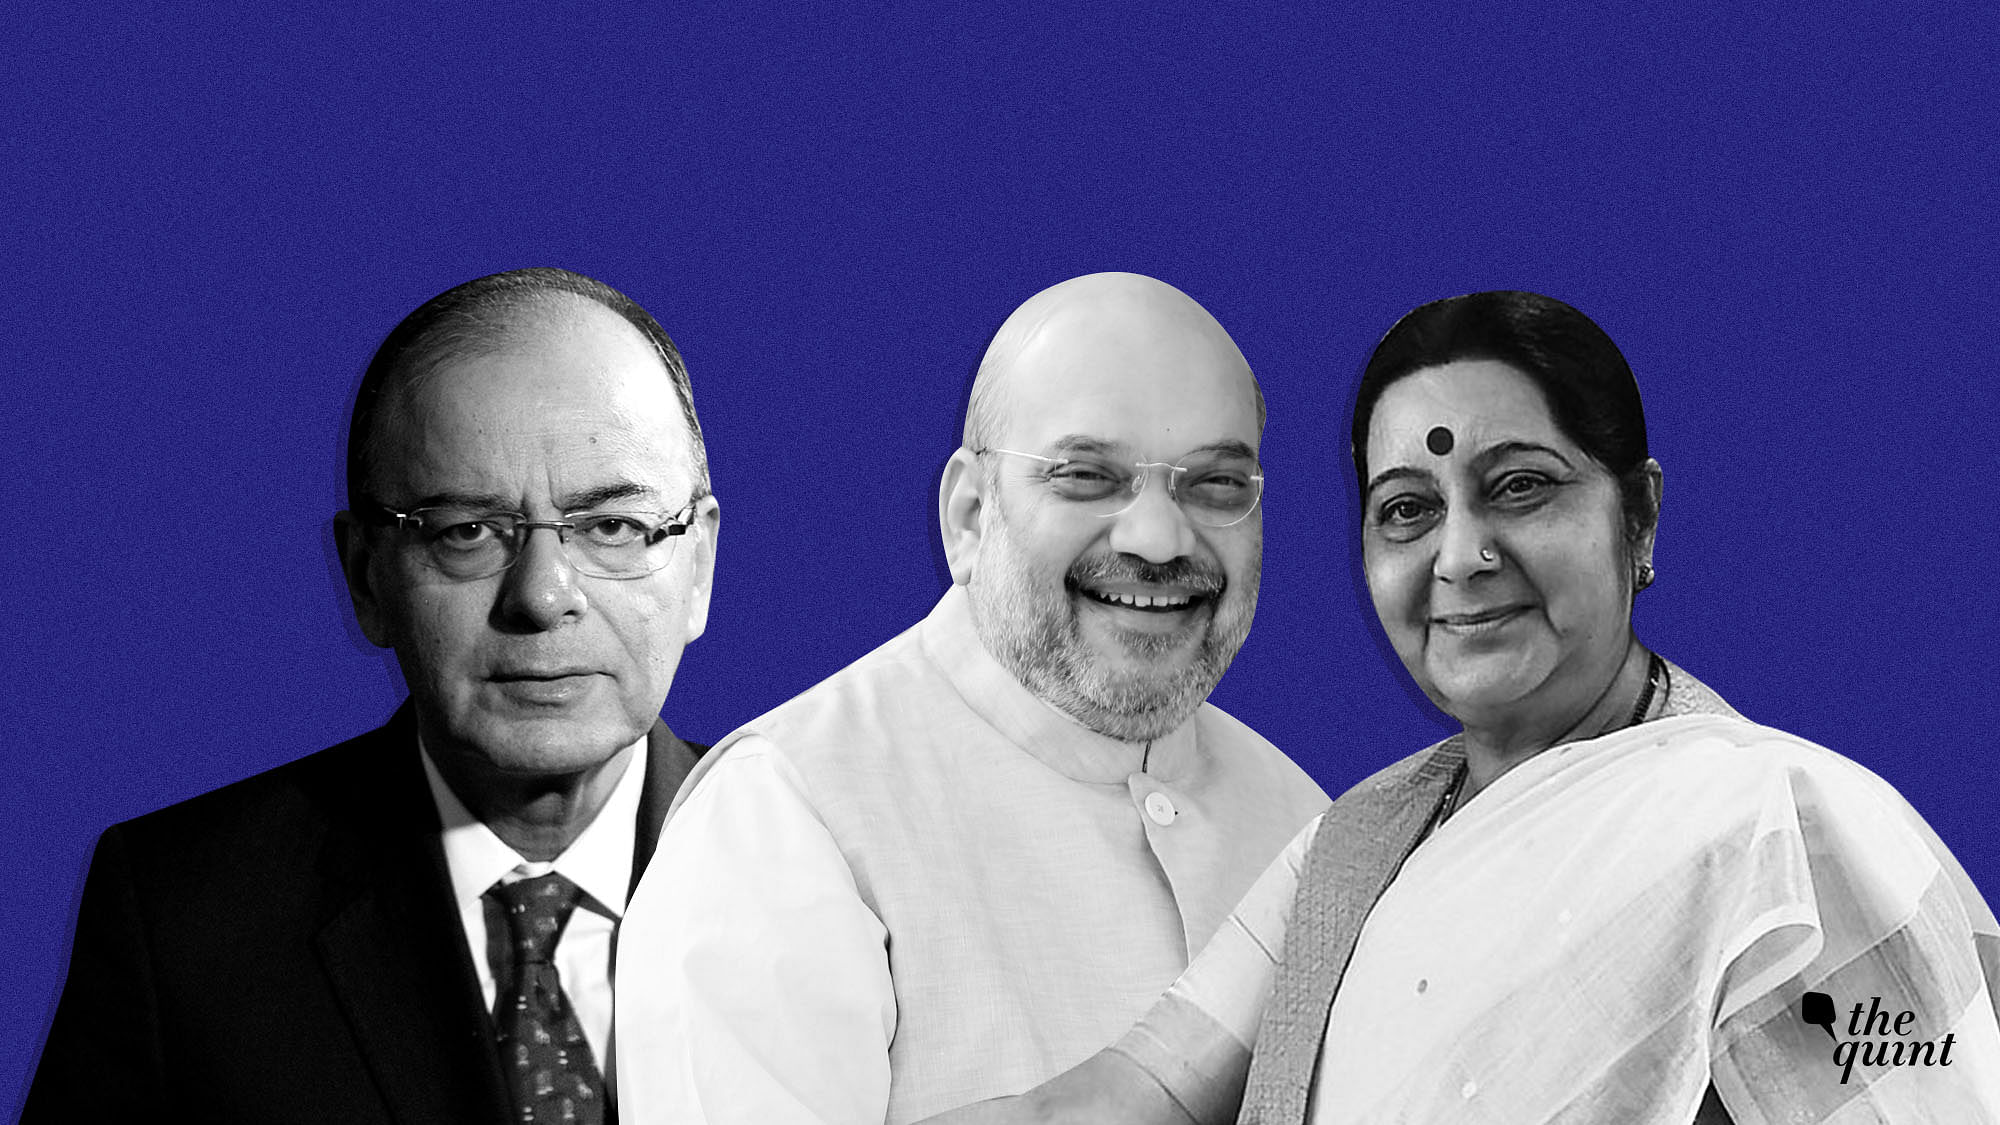 Major changes likely in Modi cabinet. Berth for Amit Shah and new role for Jaitley?